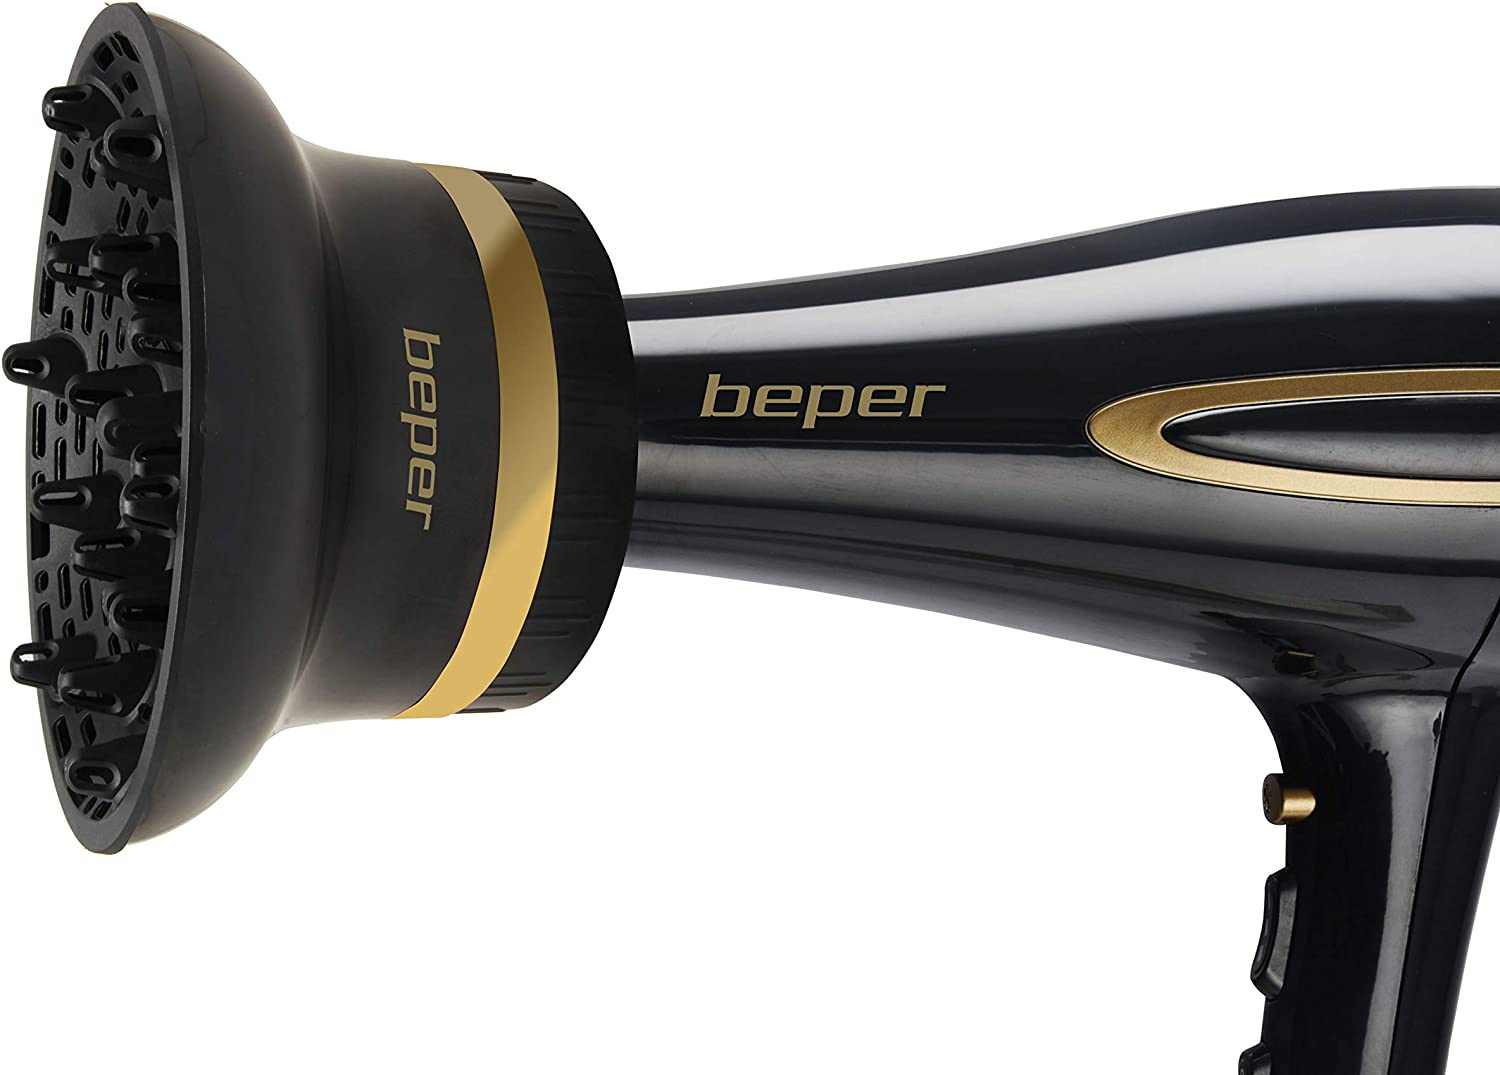 BEPER C301ABE001 Universal diffuser for curly and curly hair, without curly hair, suitable for all hair dryers, black.